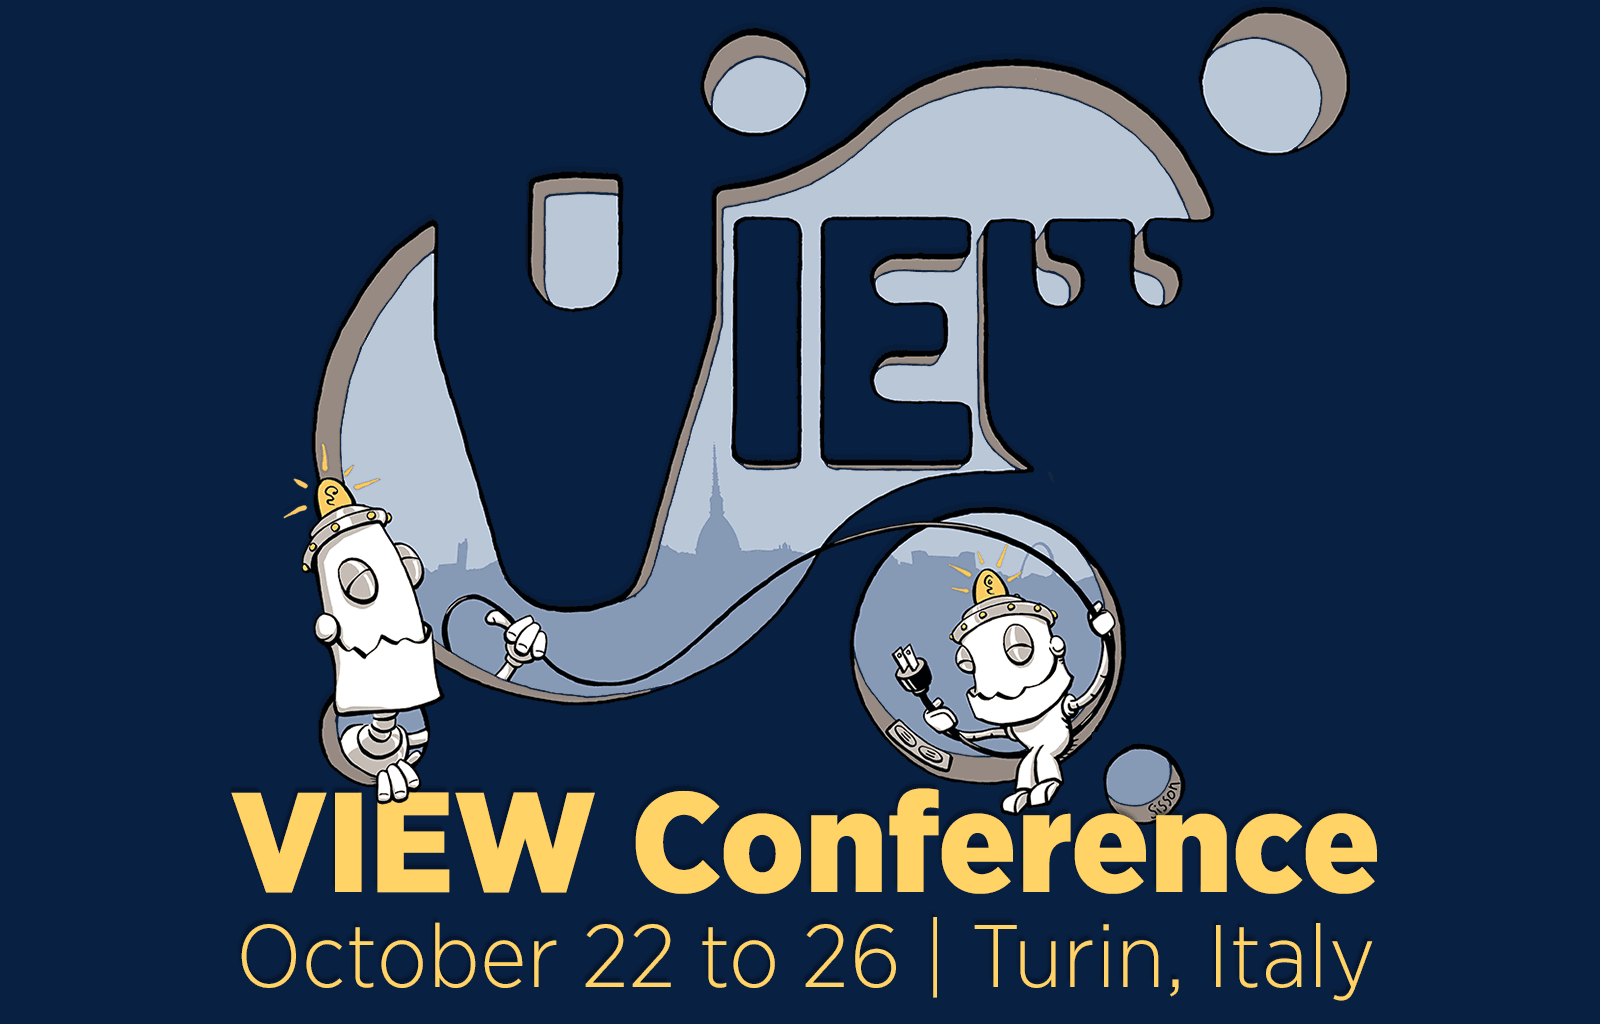 View Conference